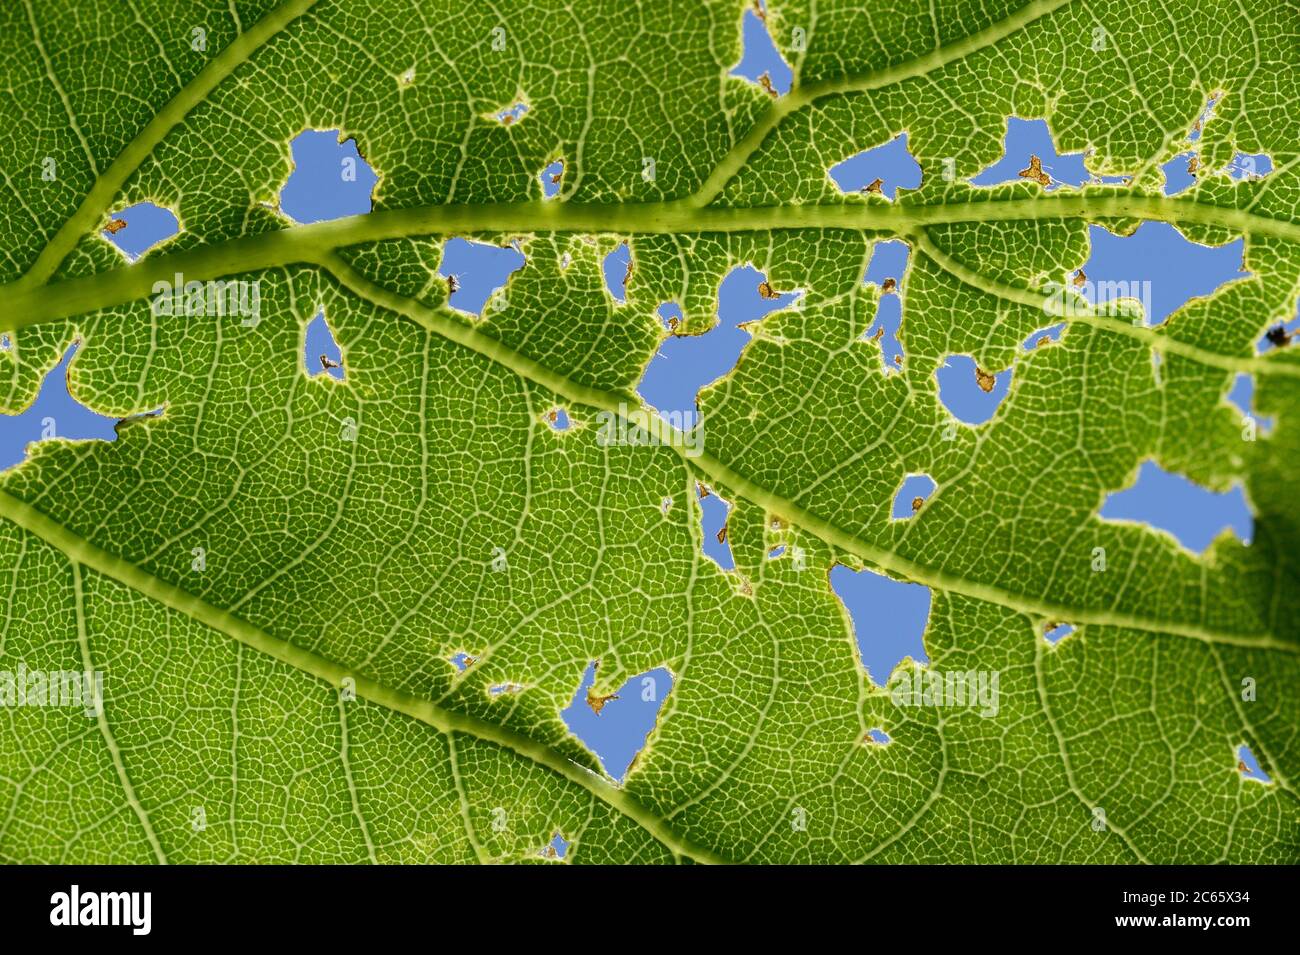 Feeding traces in a leaf of the pedunculate oak (Quercus robur) Biosphere Reserve 'Niedersächsische Elbtalaue' / Lower Saxonian Elbe Valley, Germany Stock Photo